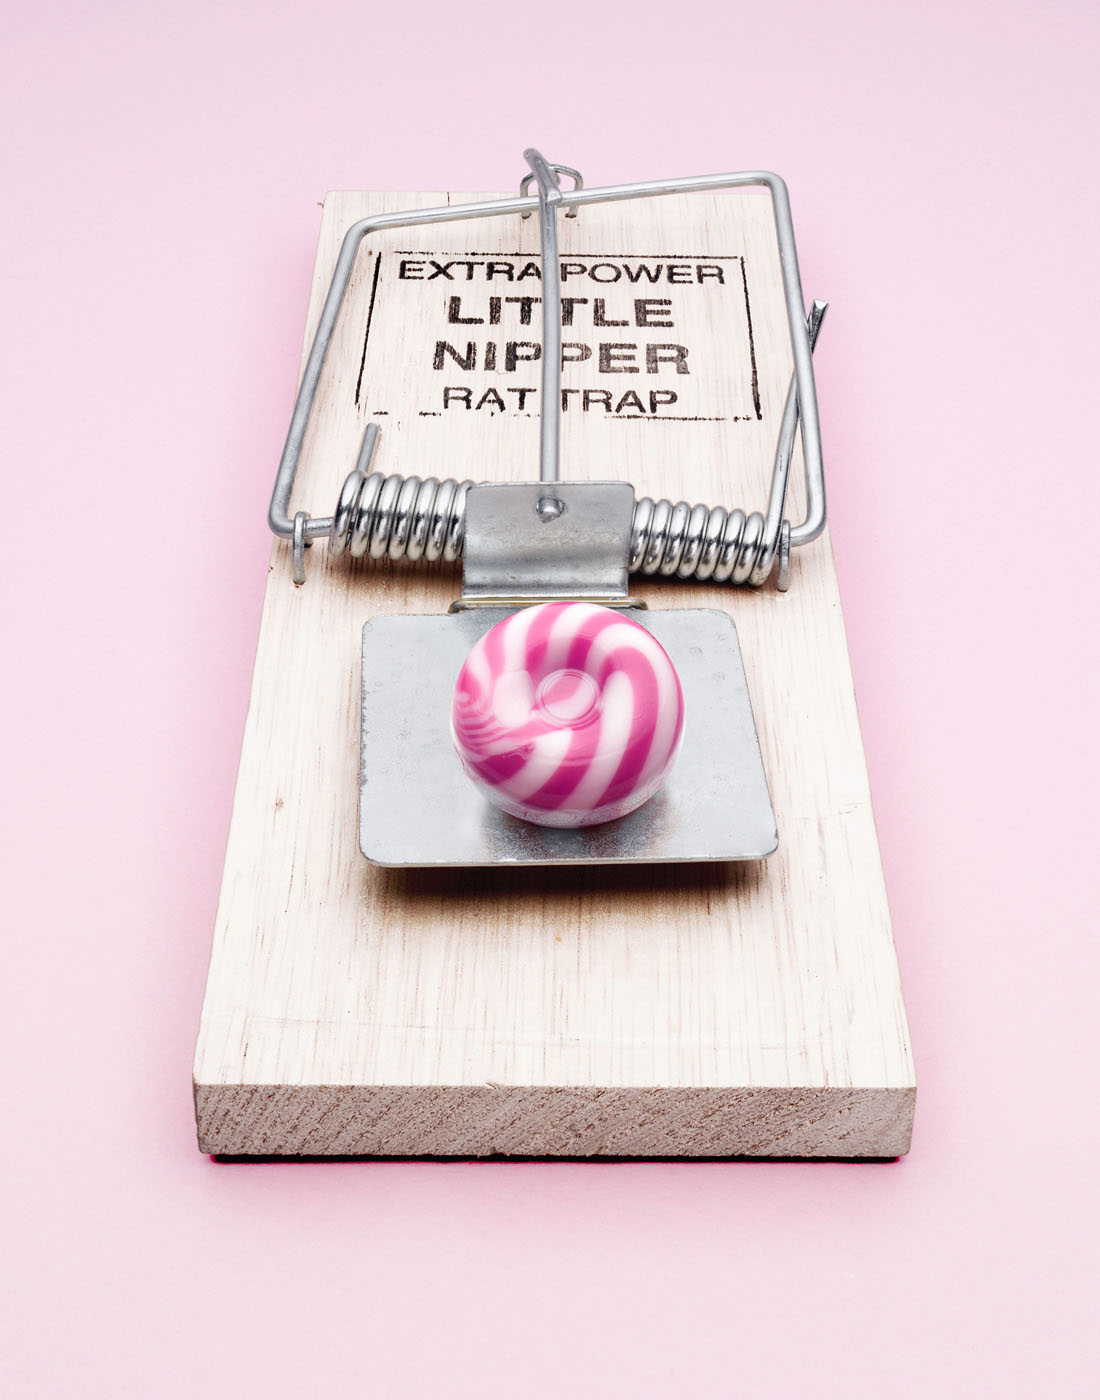 Rat trap with sweets by Alexander Kent London based still life and product photographer.